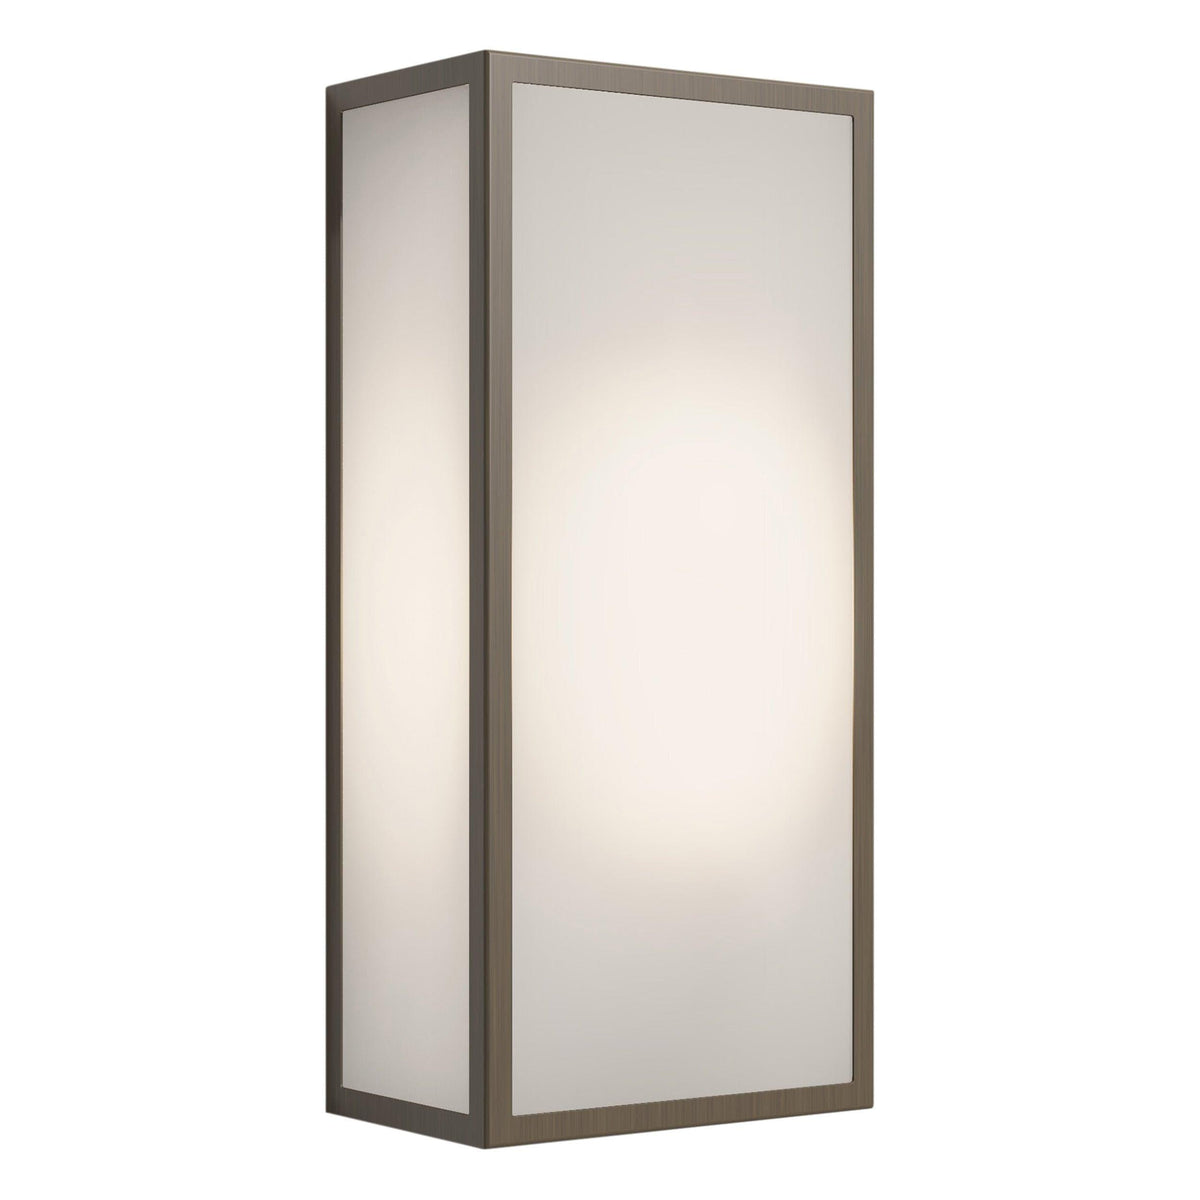 Astro Lighting - Messina Frosted Wall Light - 1183012 | Montreal Lighting & Hardware